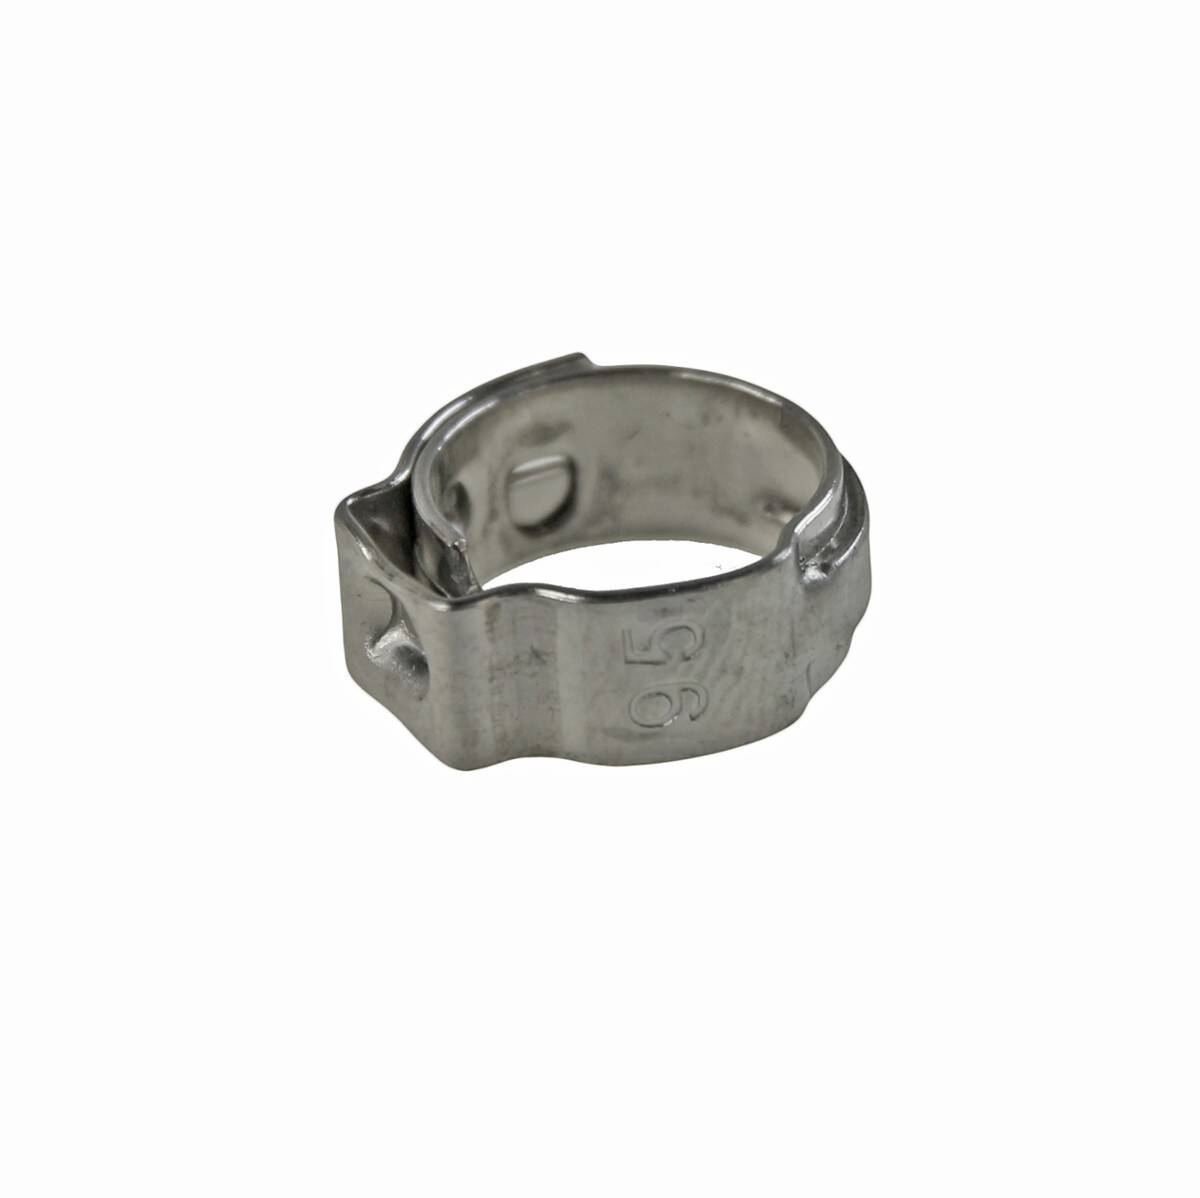 HOSE CLAMP 7.8-9.5 mm 5-0.5 STAINLESS STEEL